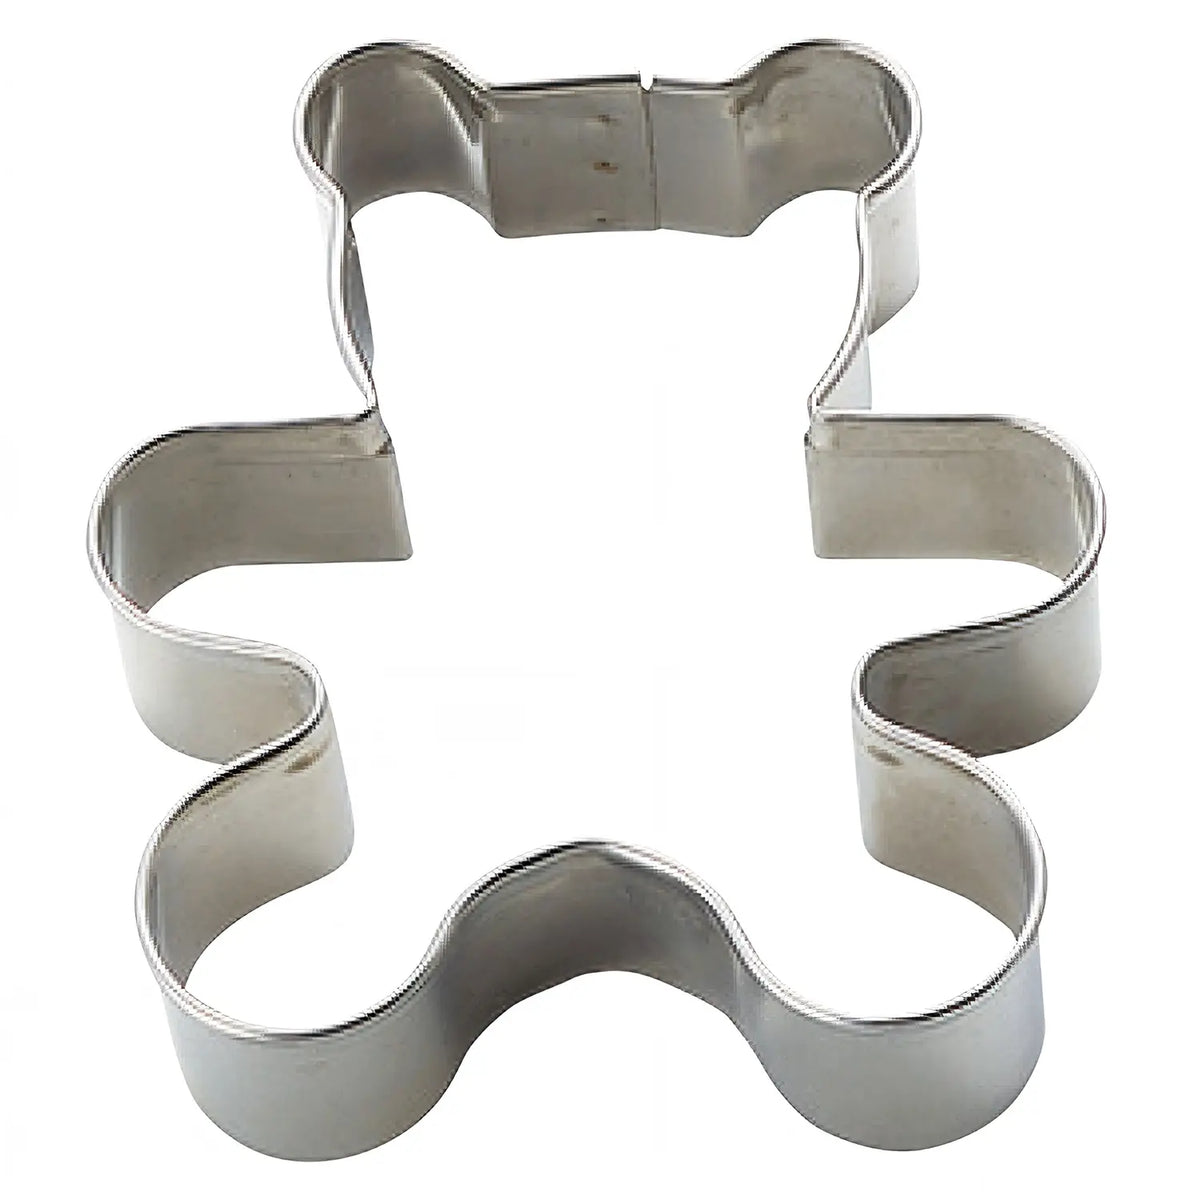 TIGERCROWN Cake Land Stainless Steel Cookie Cutter Teddy Bear